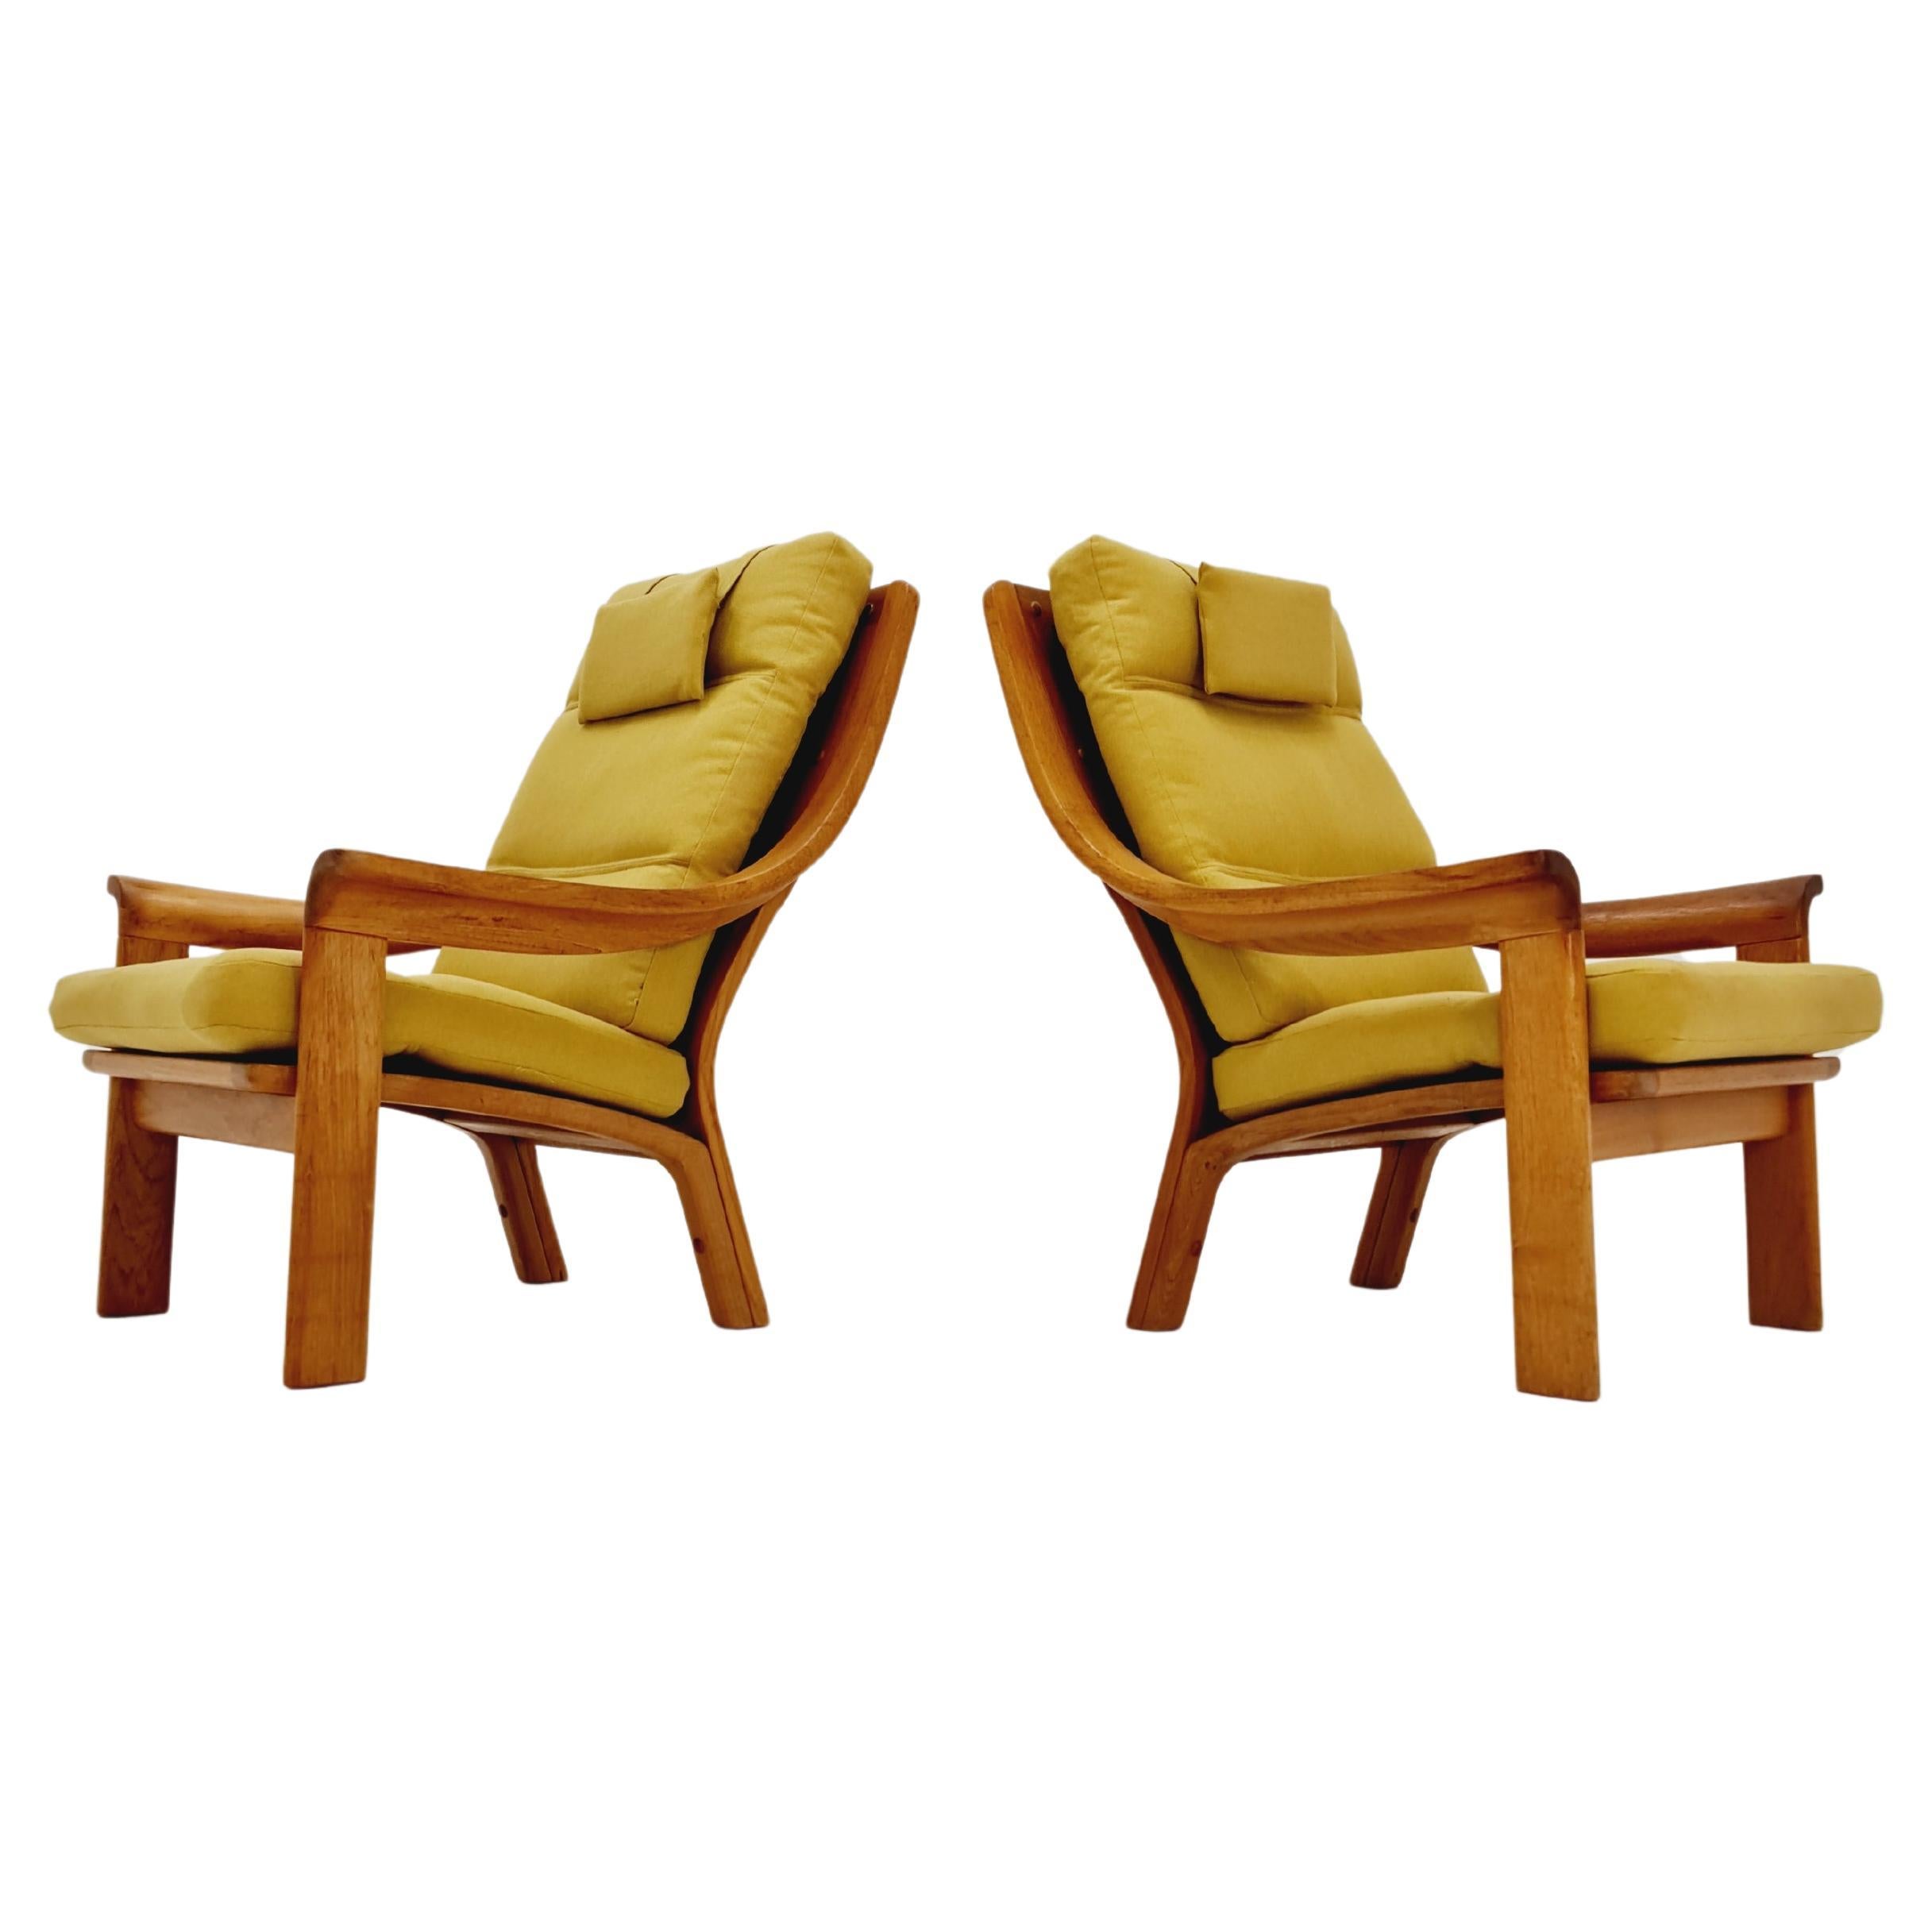 2 Mid century easy lounge chairs by P.Jeppesen in solid teak